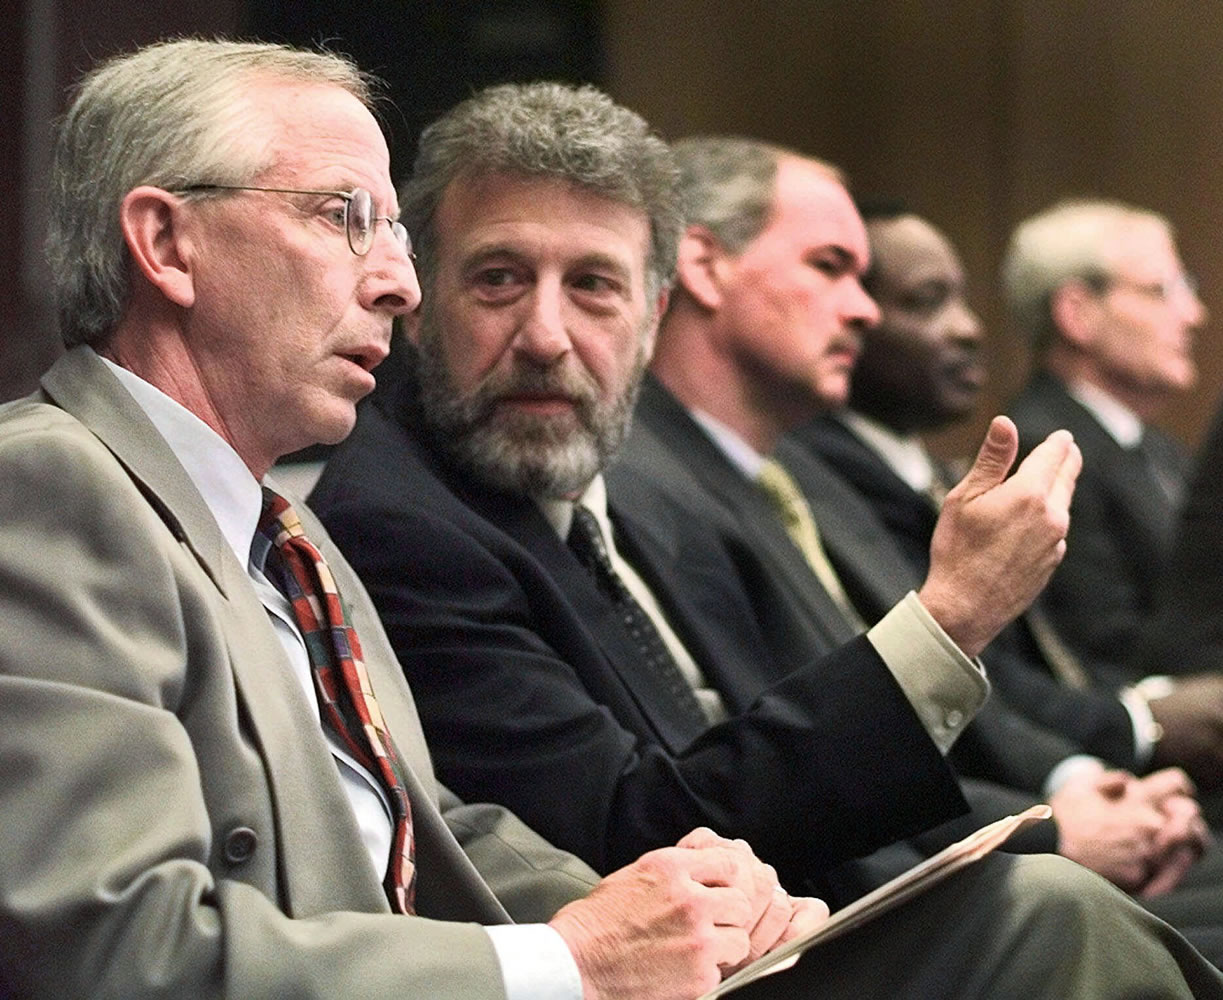 George Zimmer, second from left, speaks with Andy Dolich prior to a 1999 meeting in Oakland, Calif.